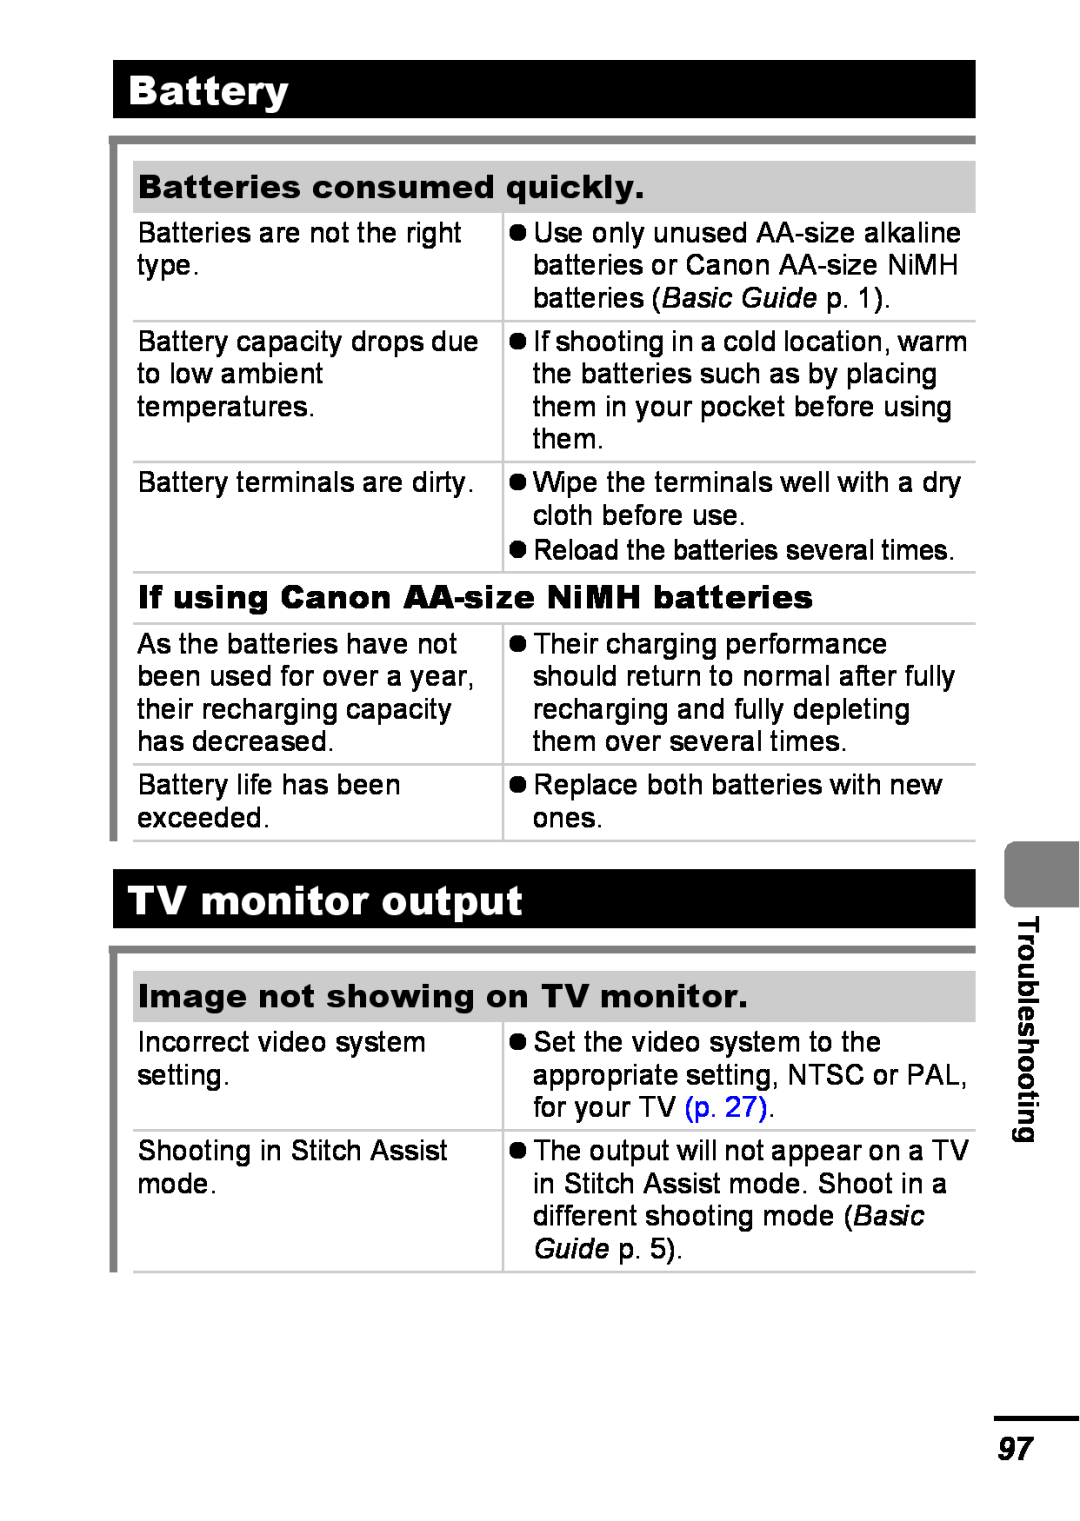 Canon A540 appendix Battery, TV monitor output, Batteries consumed quickly, If using Canon AA-size NiMH batteries, Guide p 